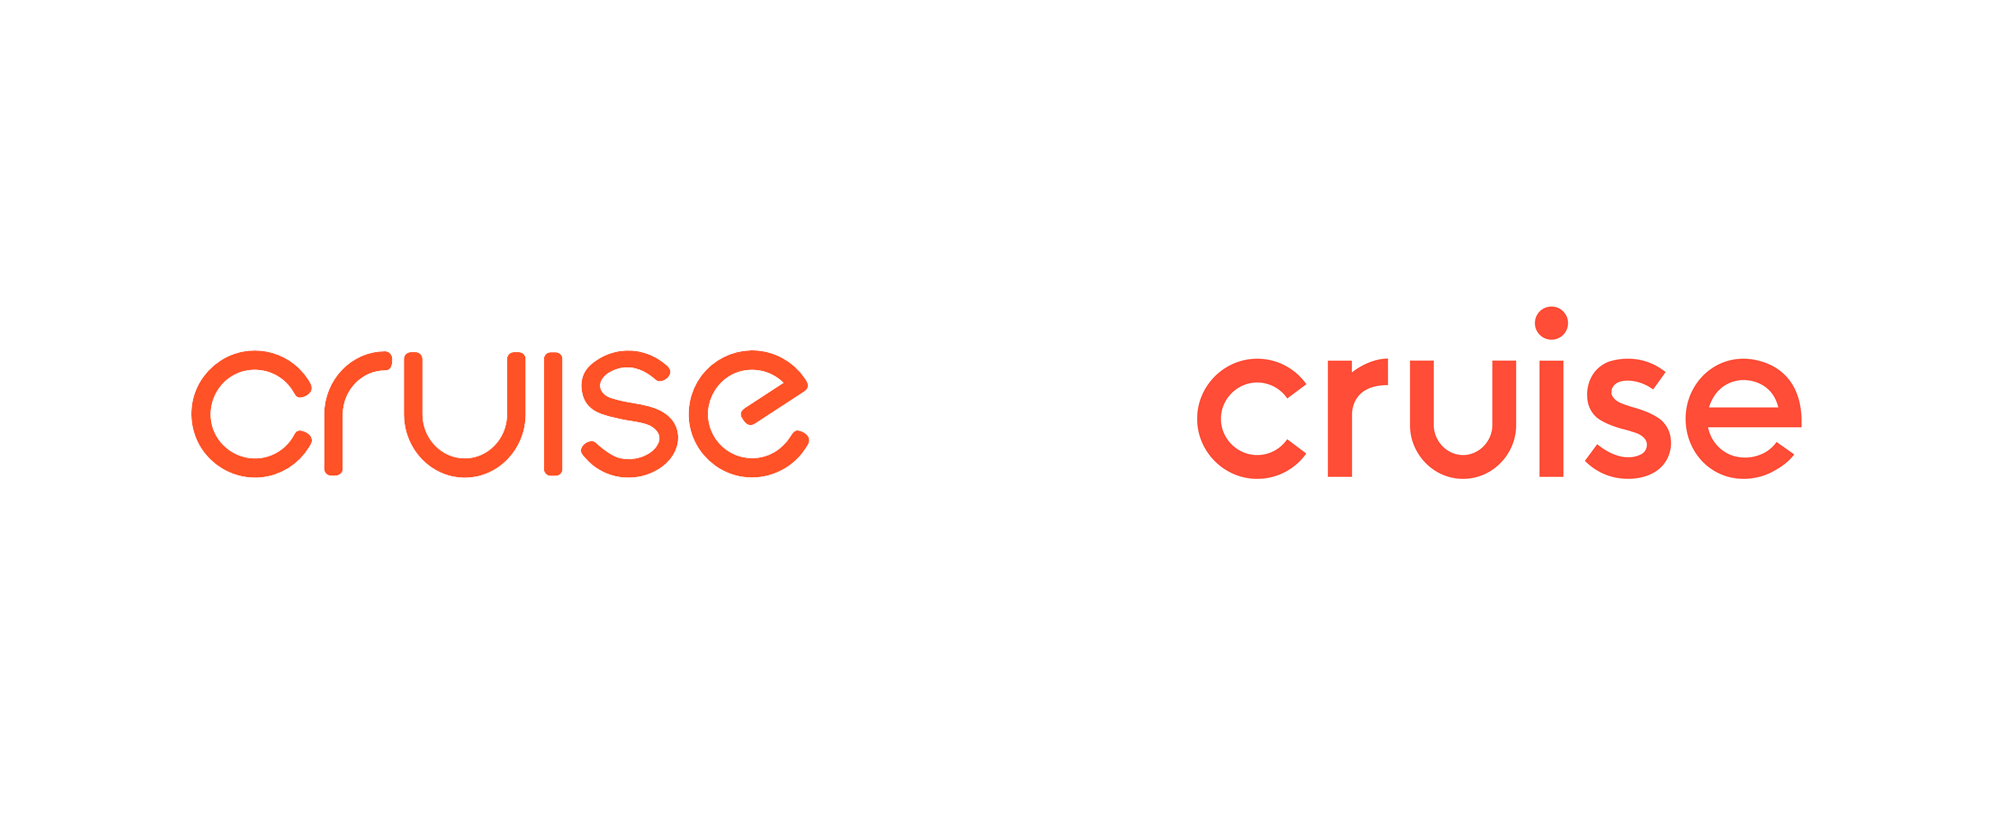 New Logo and Identity for Cruise by Moving Brands and In-house